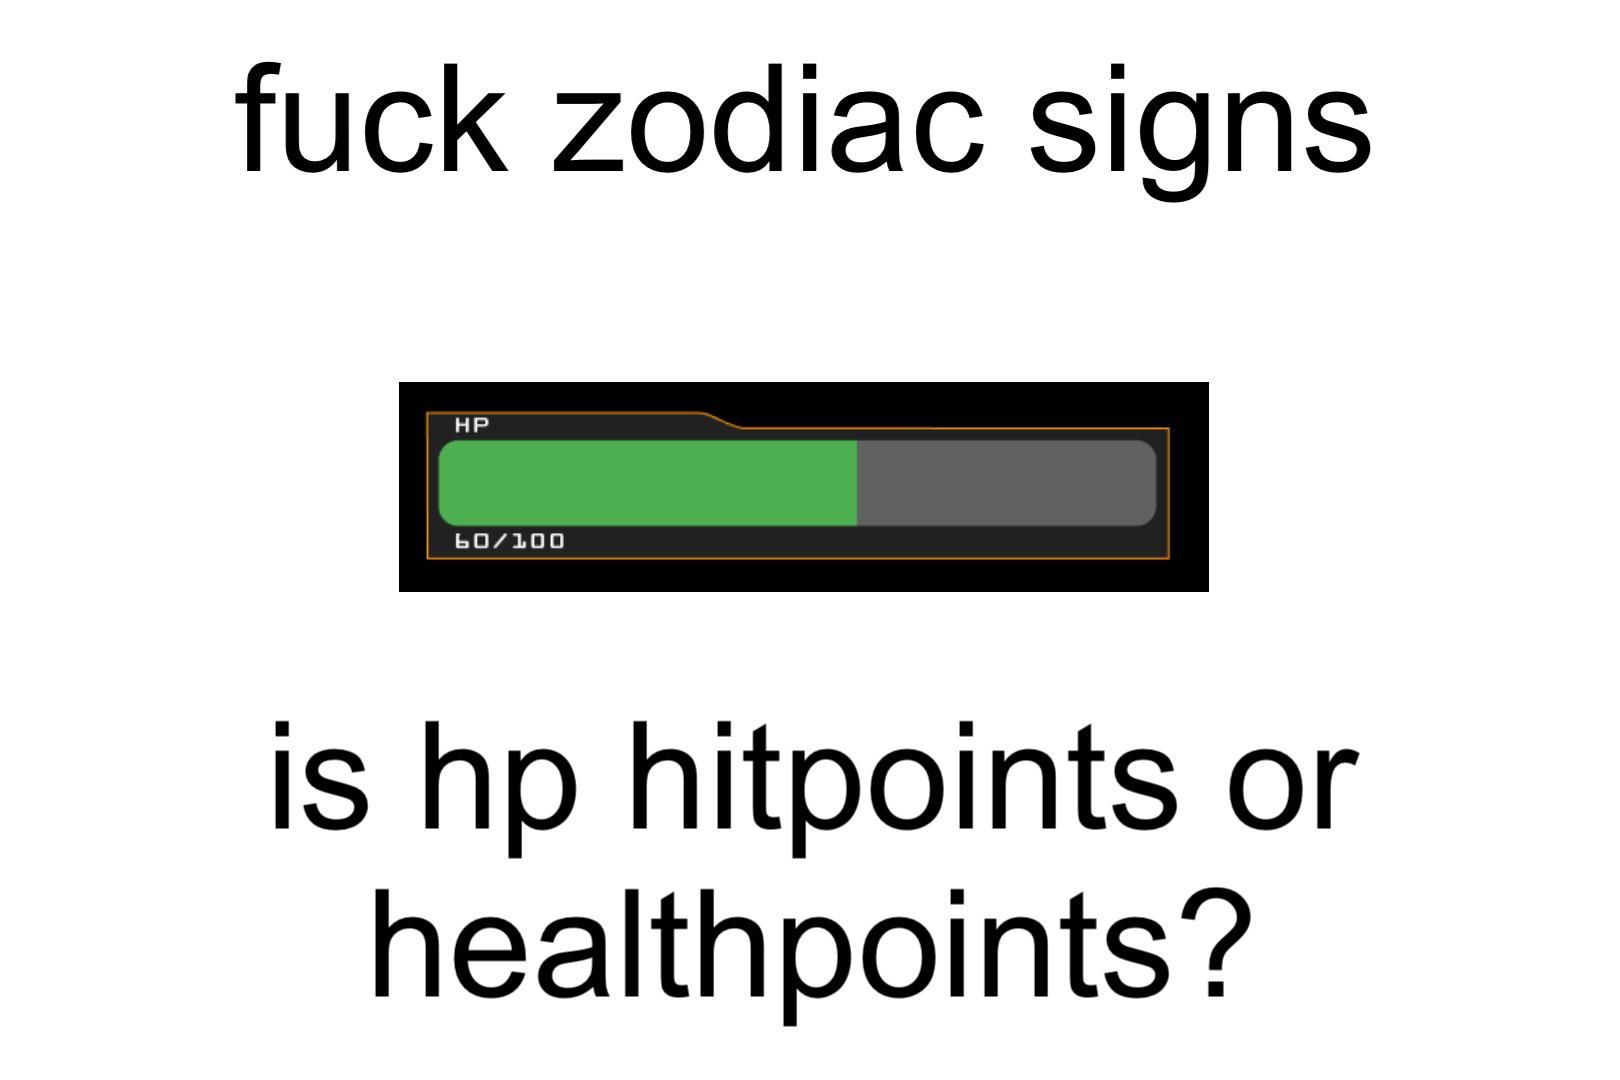 Apparently some people say “healthpoints”